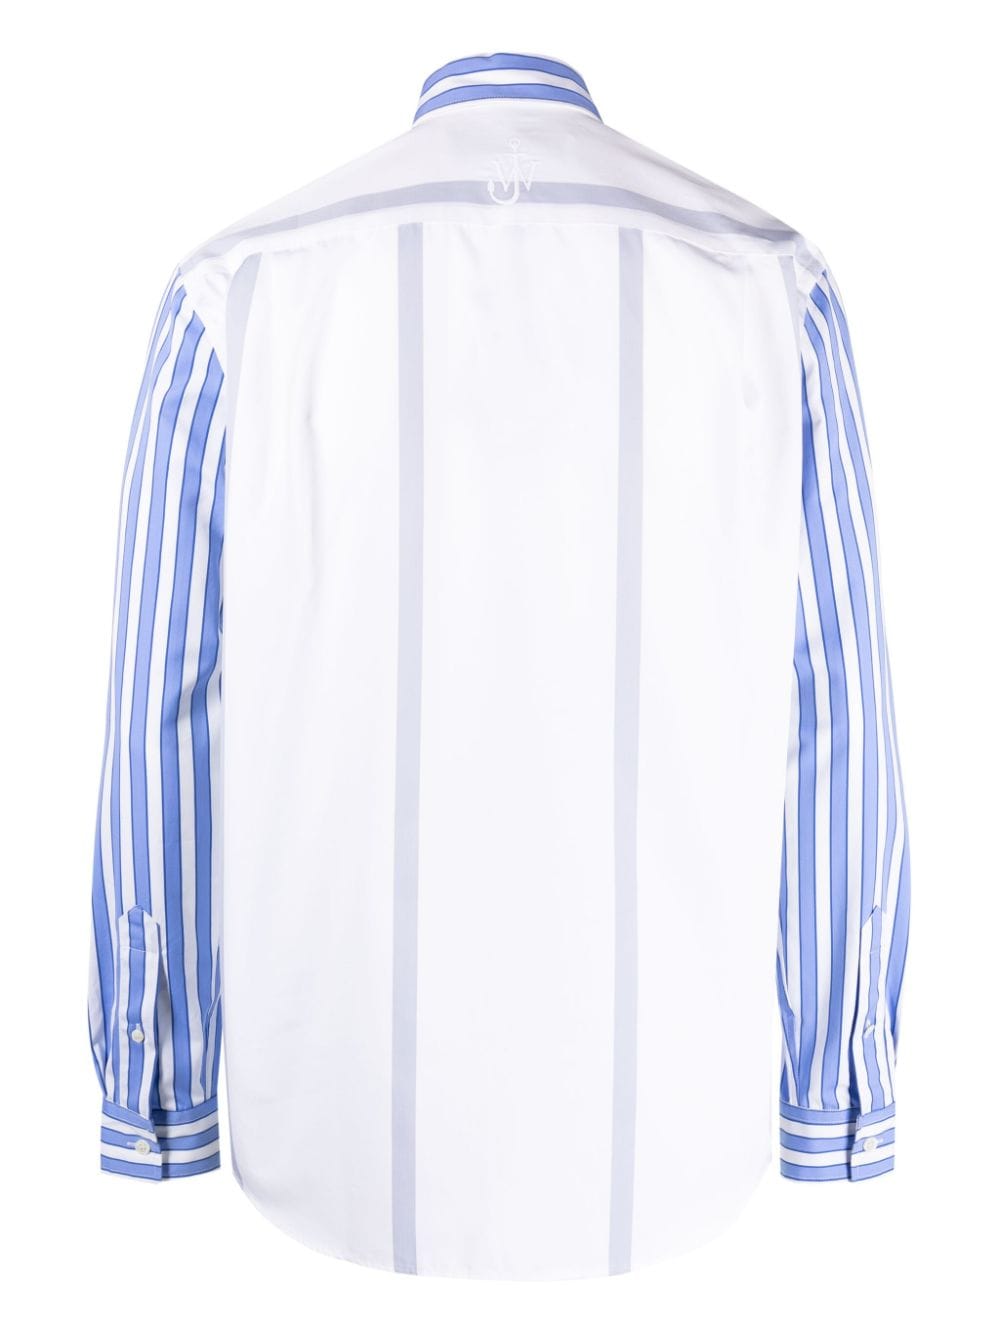 Striped panelled cotton shirt<BR/><BR/><BR/>